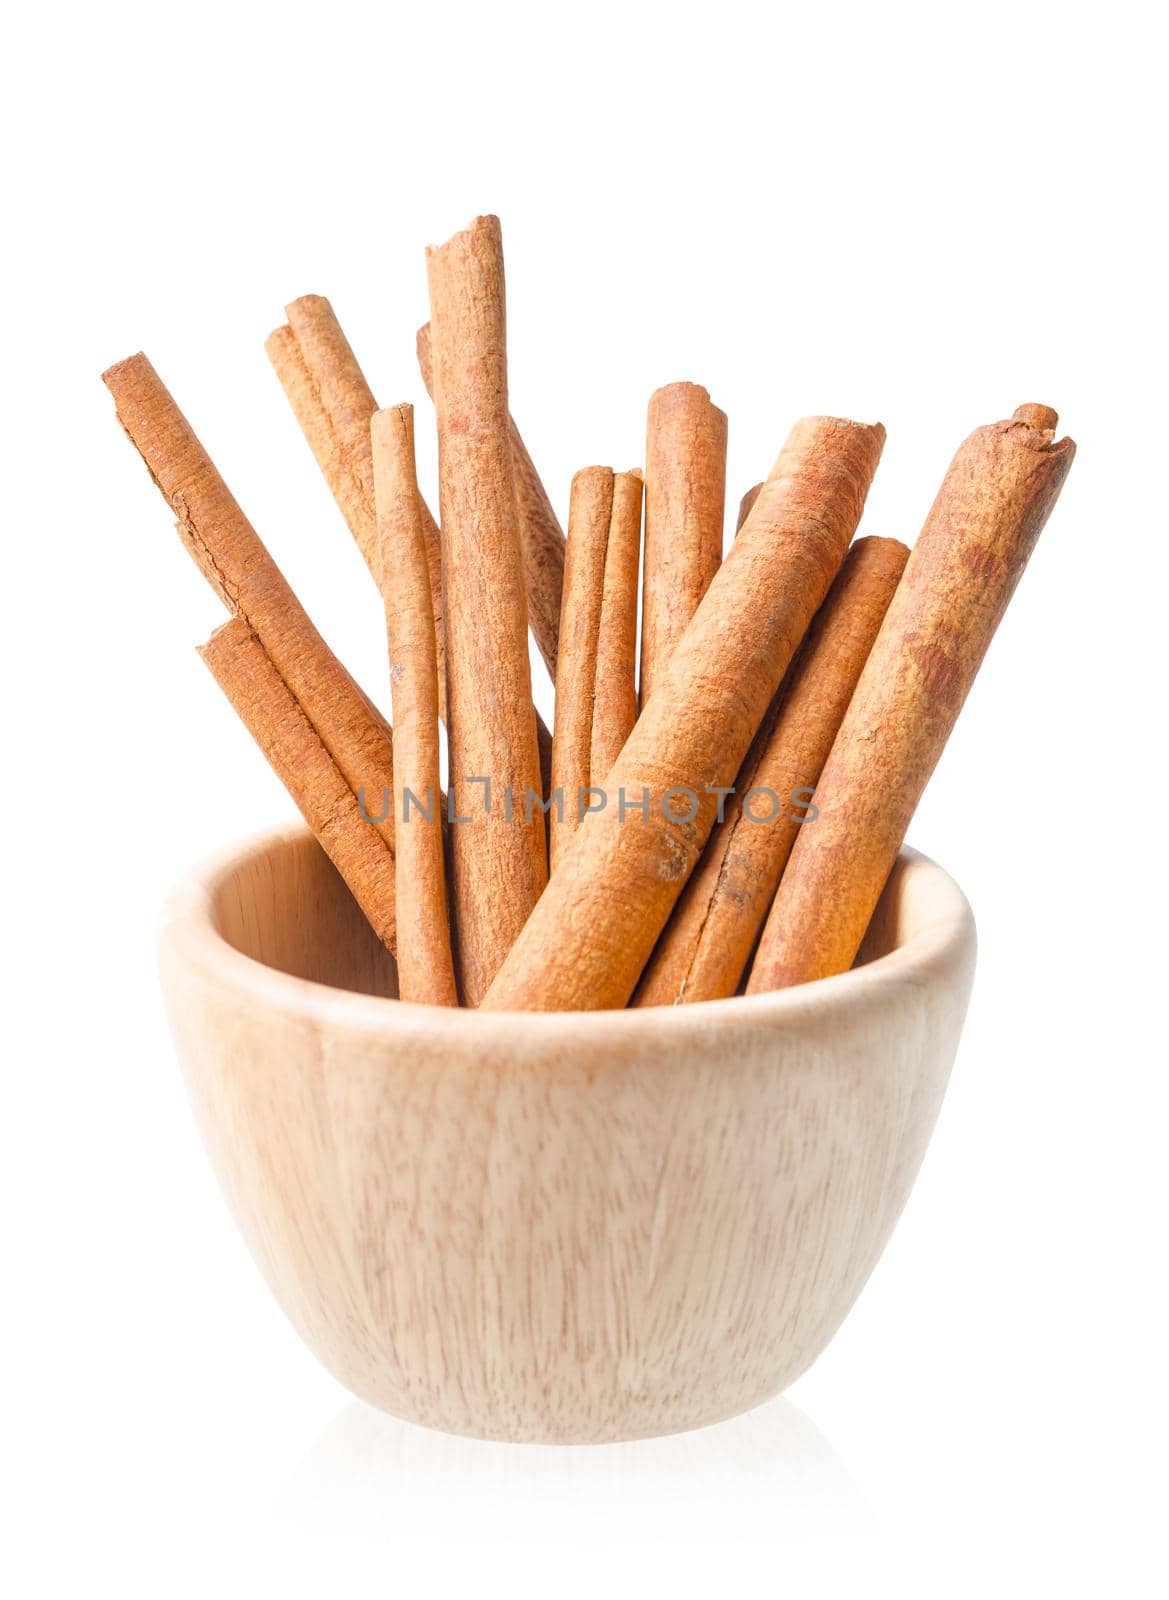 Cinnamon sticks in wooden bowl isolated on white background, Save clipping path.